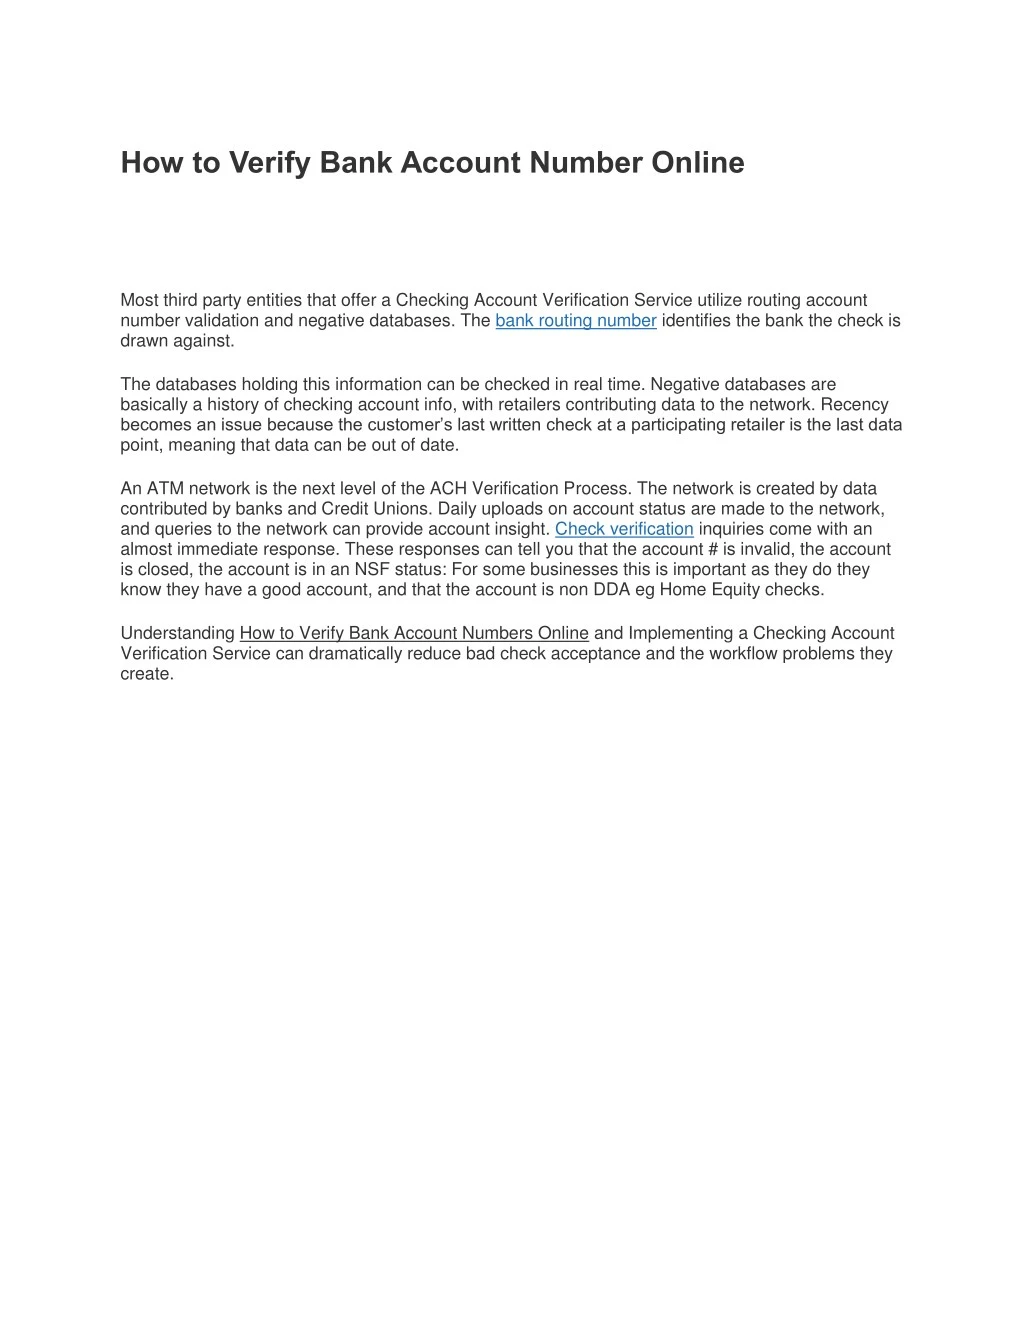 how to verify bank account number online